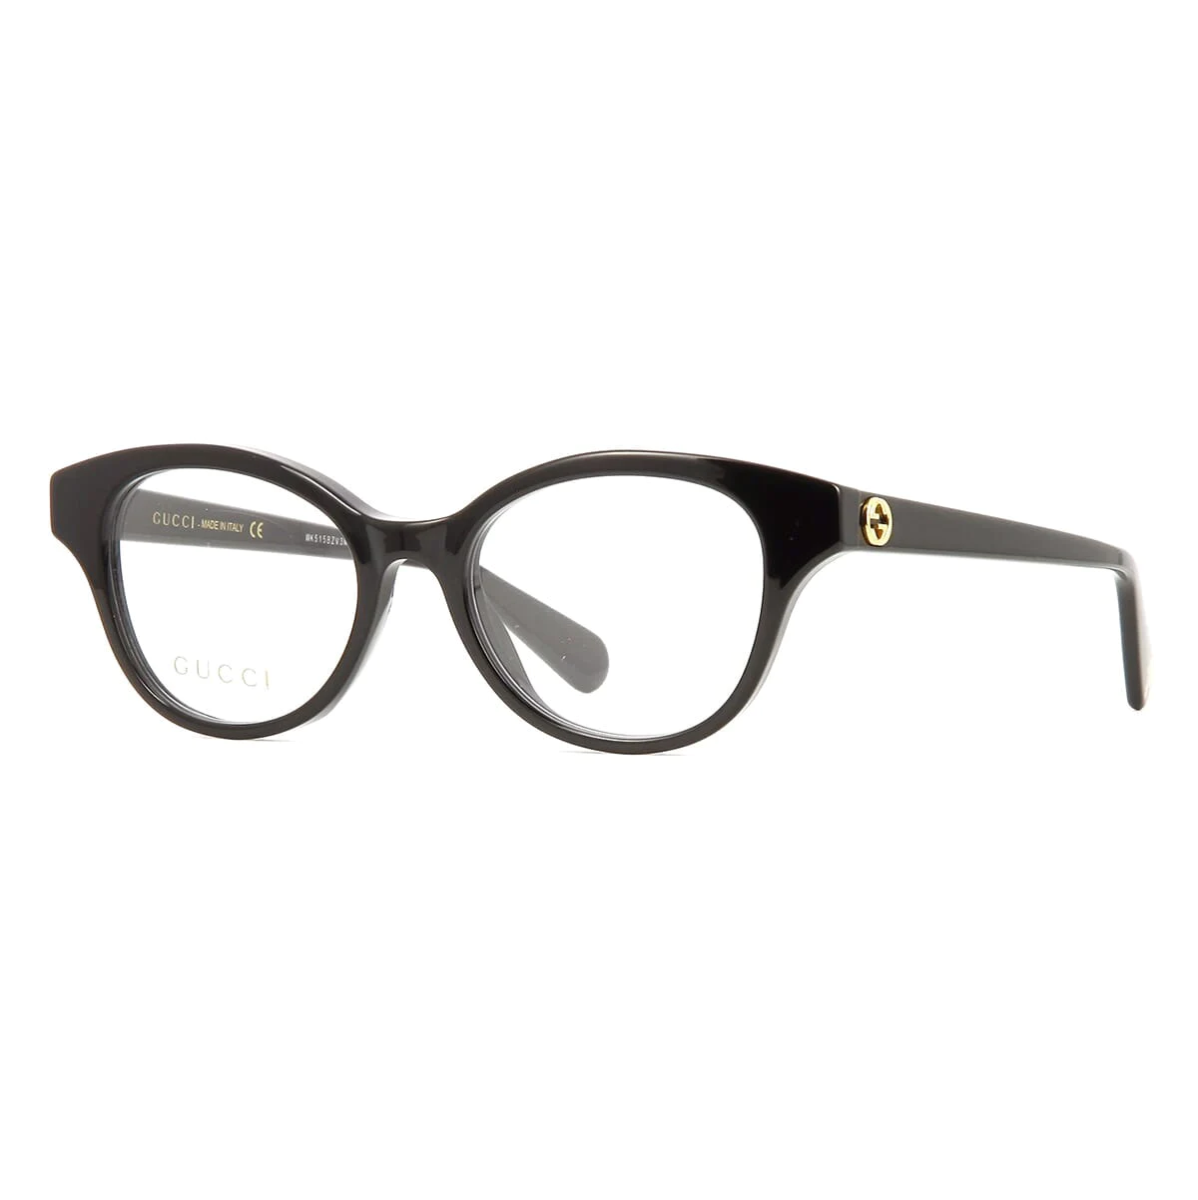  "Gucci 1221O Unisex Frames - Premium spectacles for men and women at Optorium."